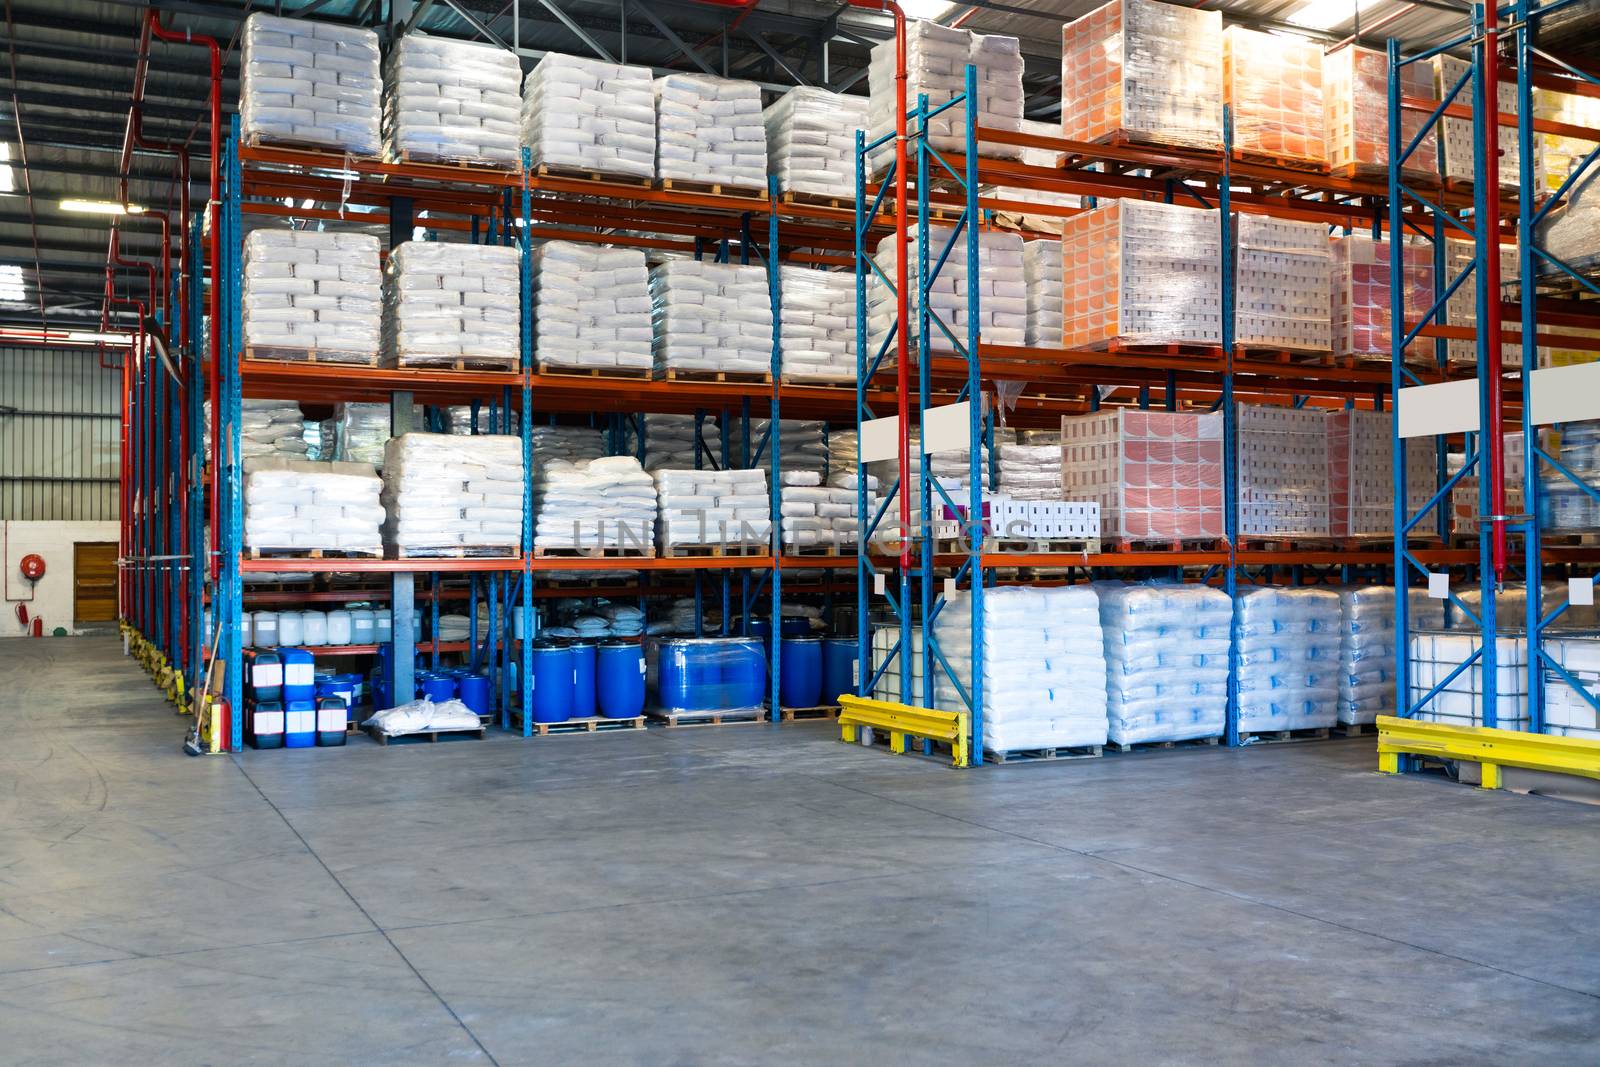 Barrel and goods arranged on a rack in warehouse. This is a freight transportation and distribution warehouse. Industrial and industrial workers concept